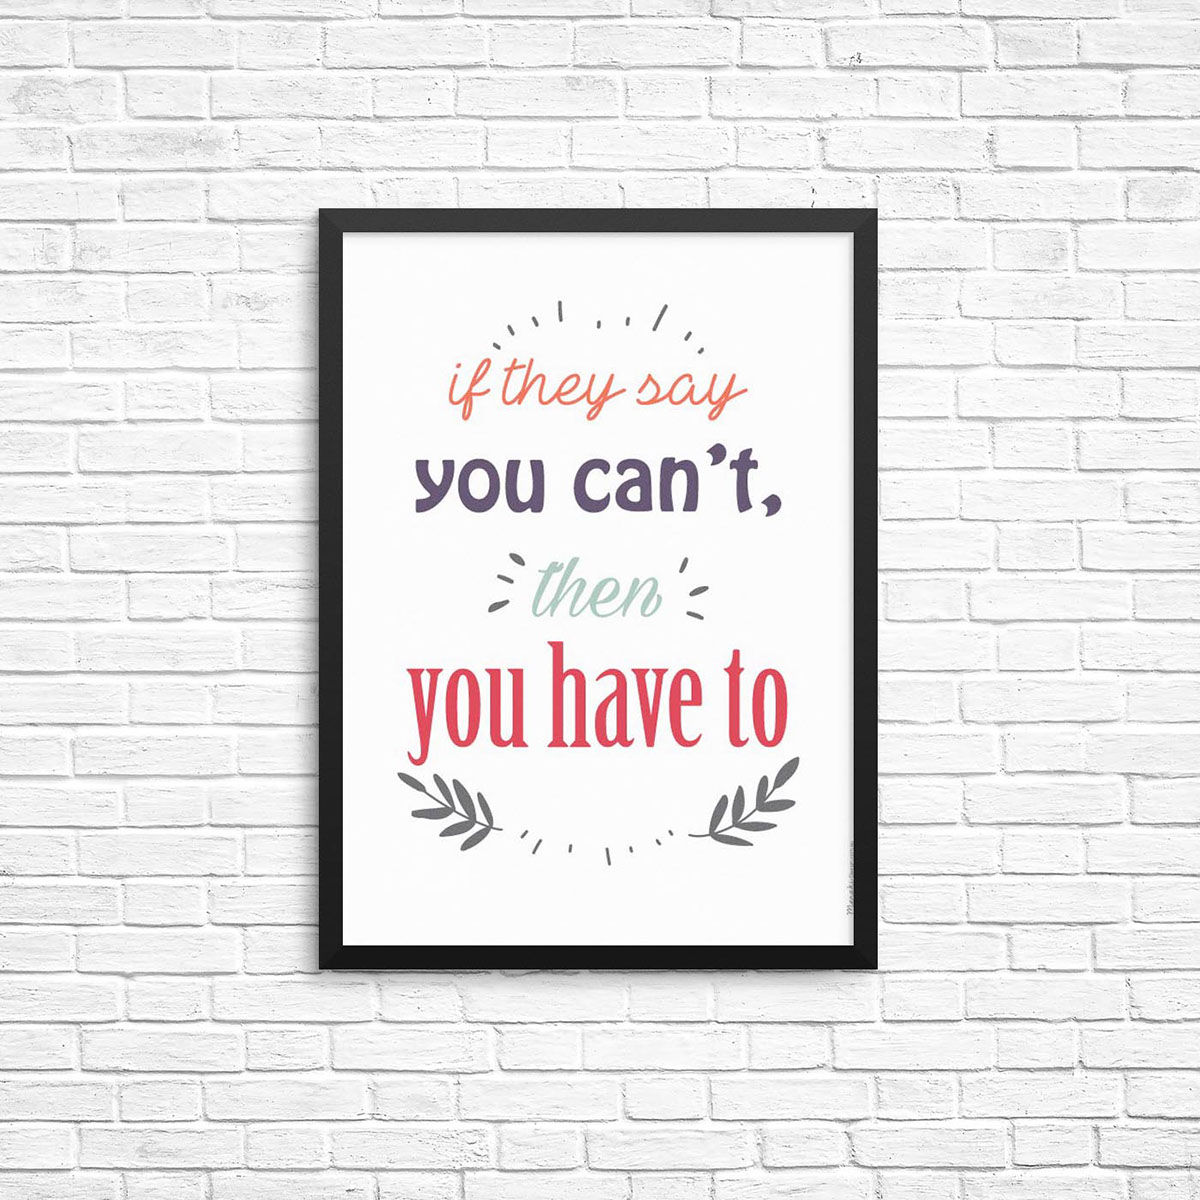 Quotes art poster kids